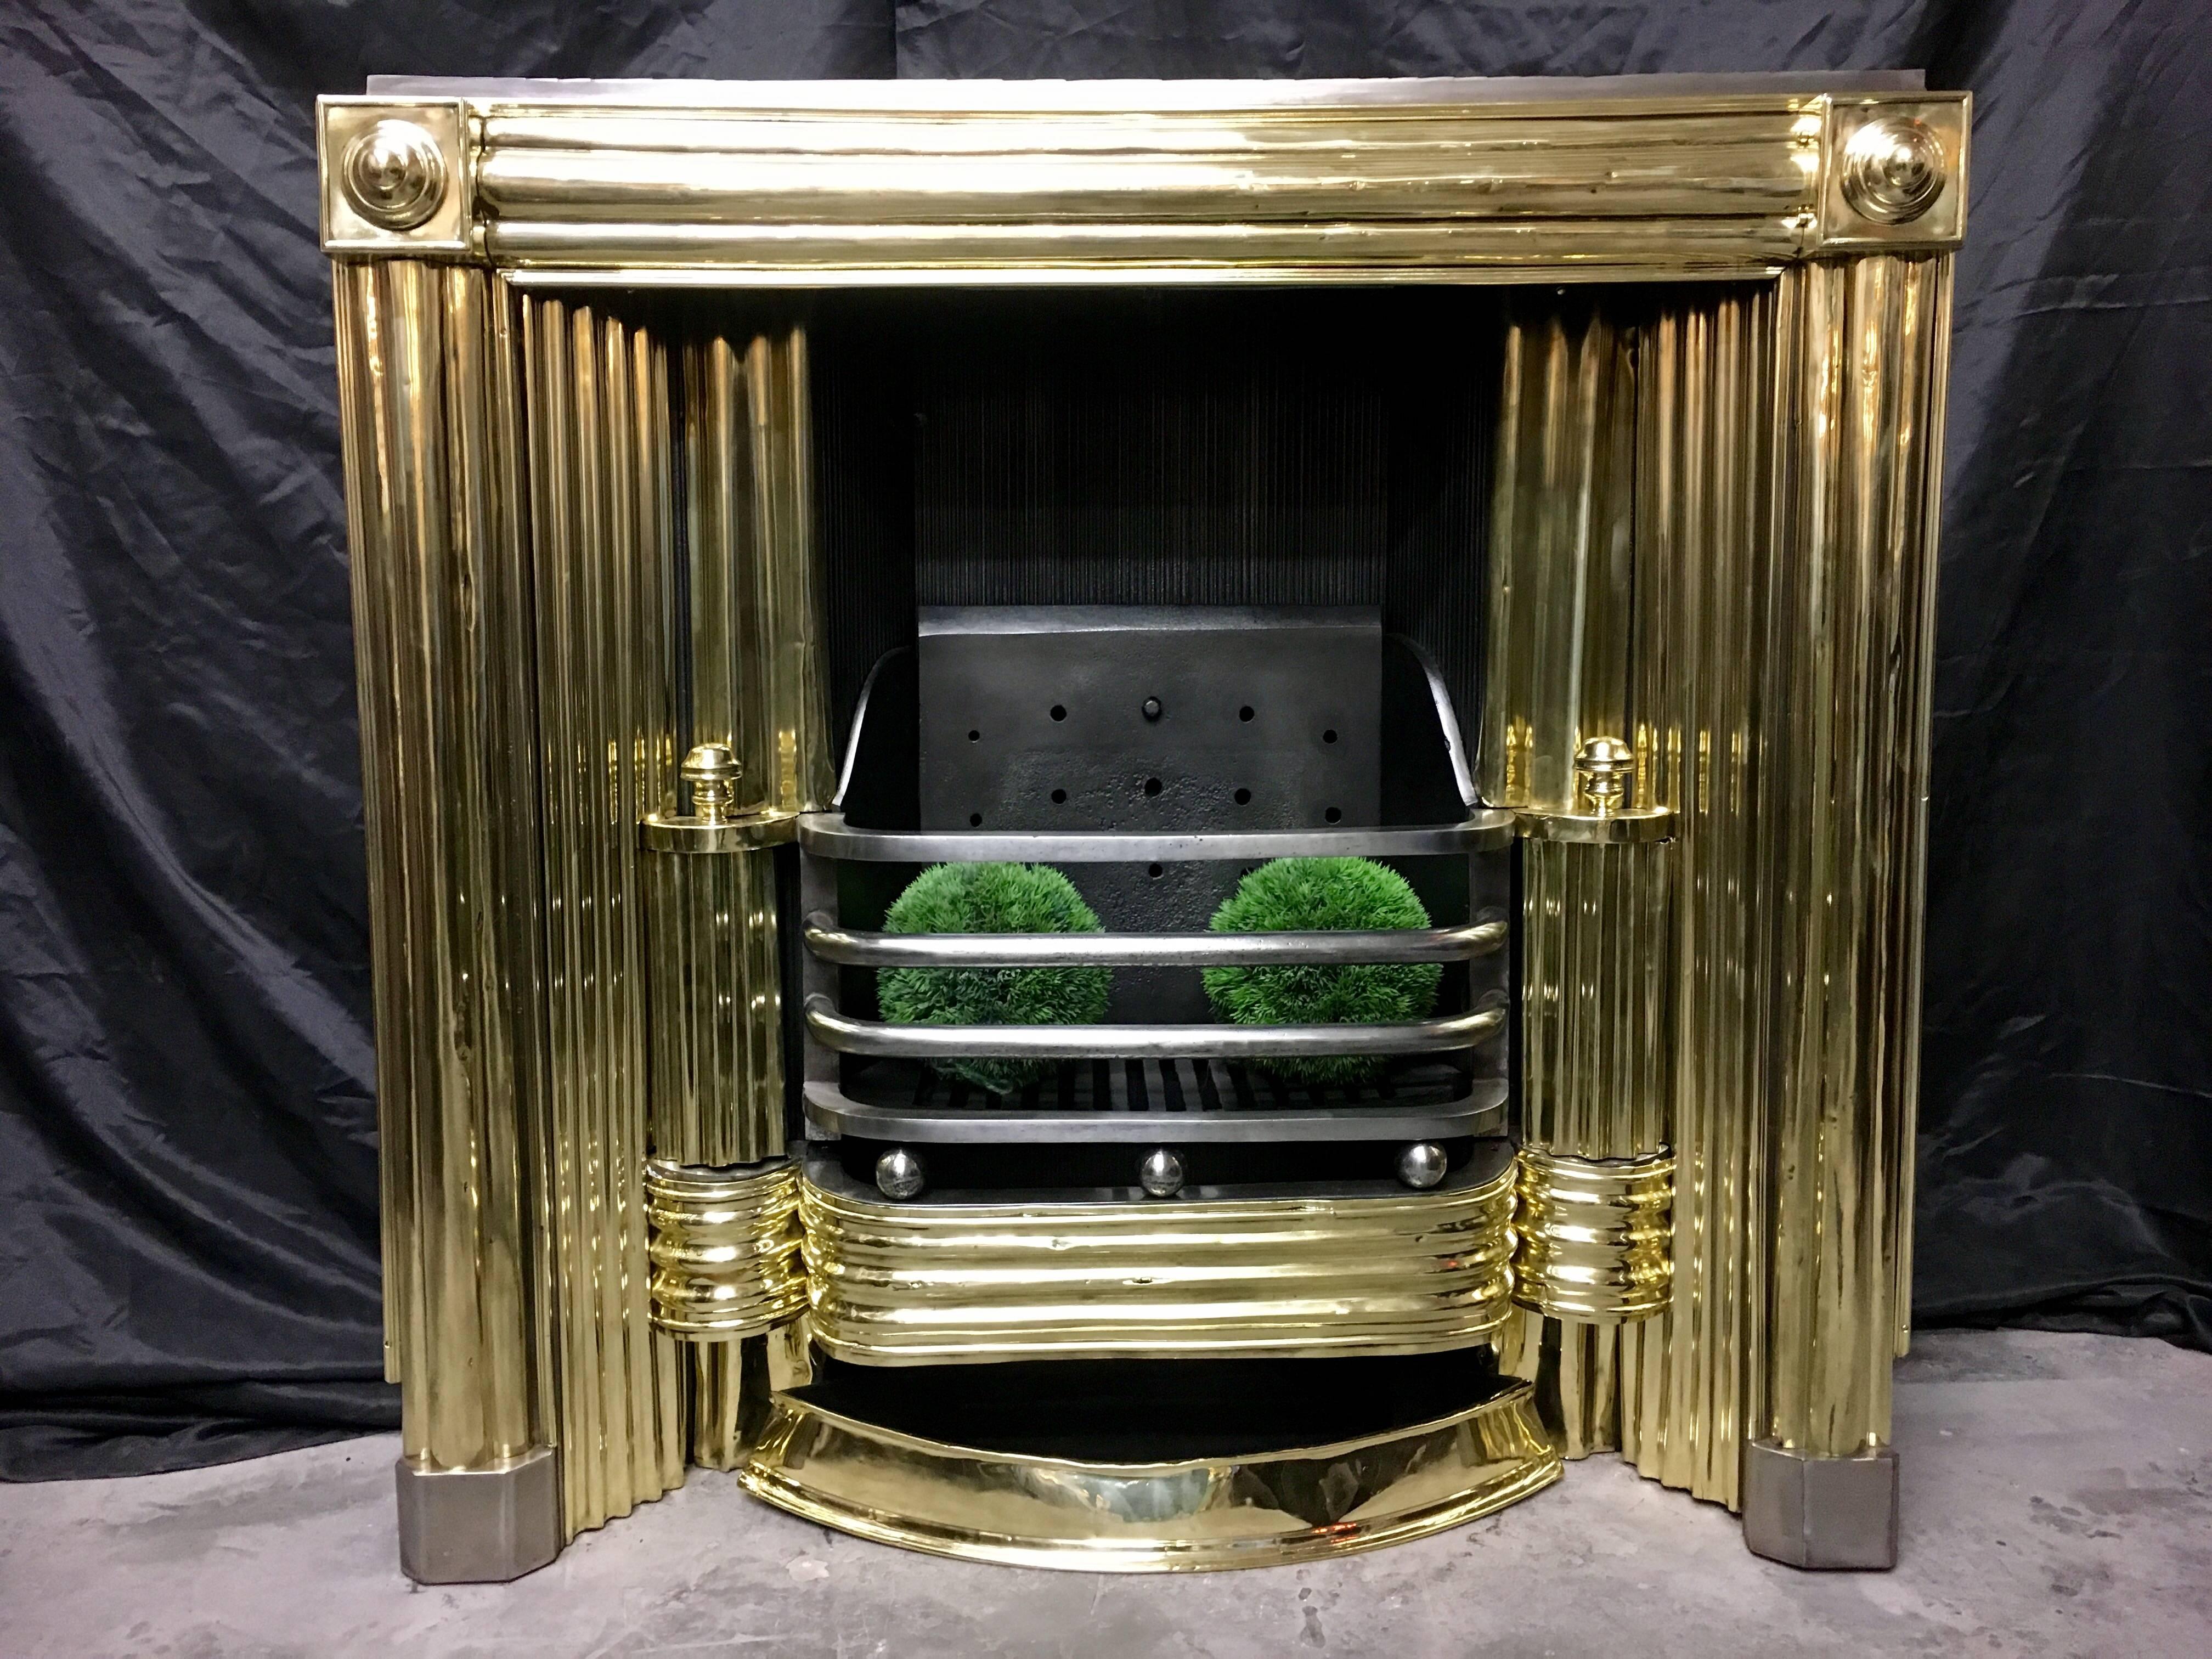 A fine and rare 19th Century Regency fireplace Insert grate, salvaged from Anne Street, Edinburgh Scotland. Circular rondel's to capitals with raised reeded brass fronts and fret. Polished brass reflector plates, with its original ash pan.